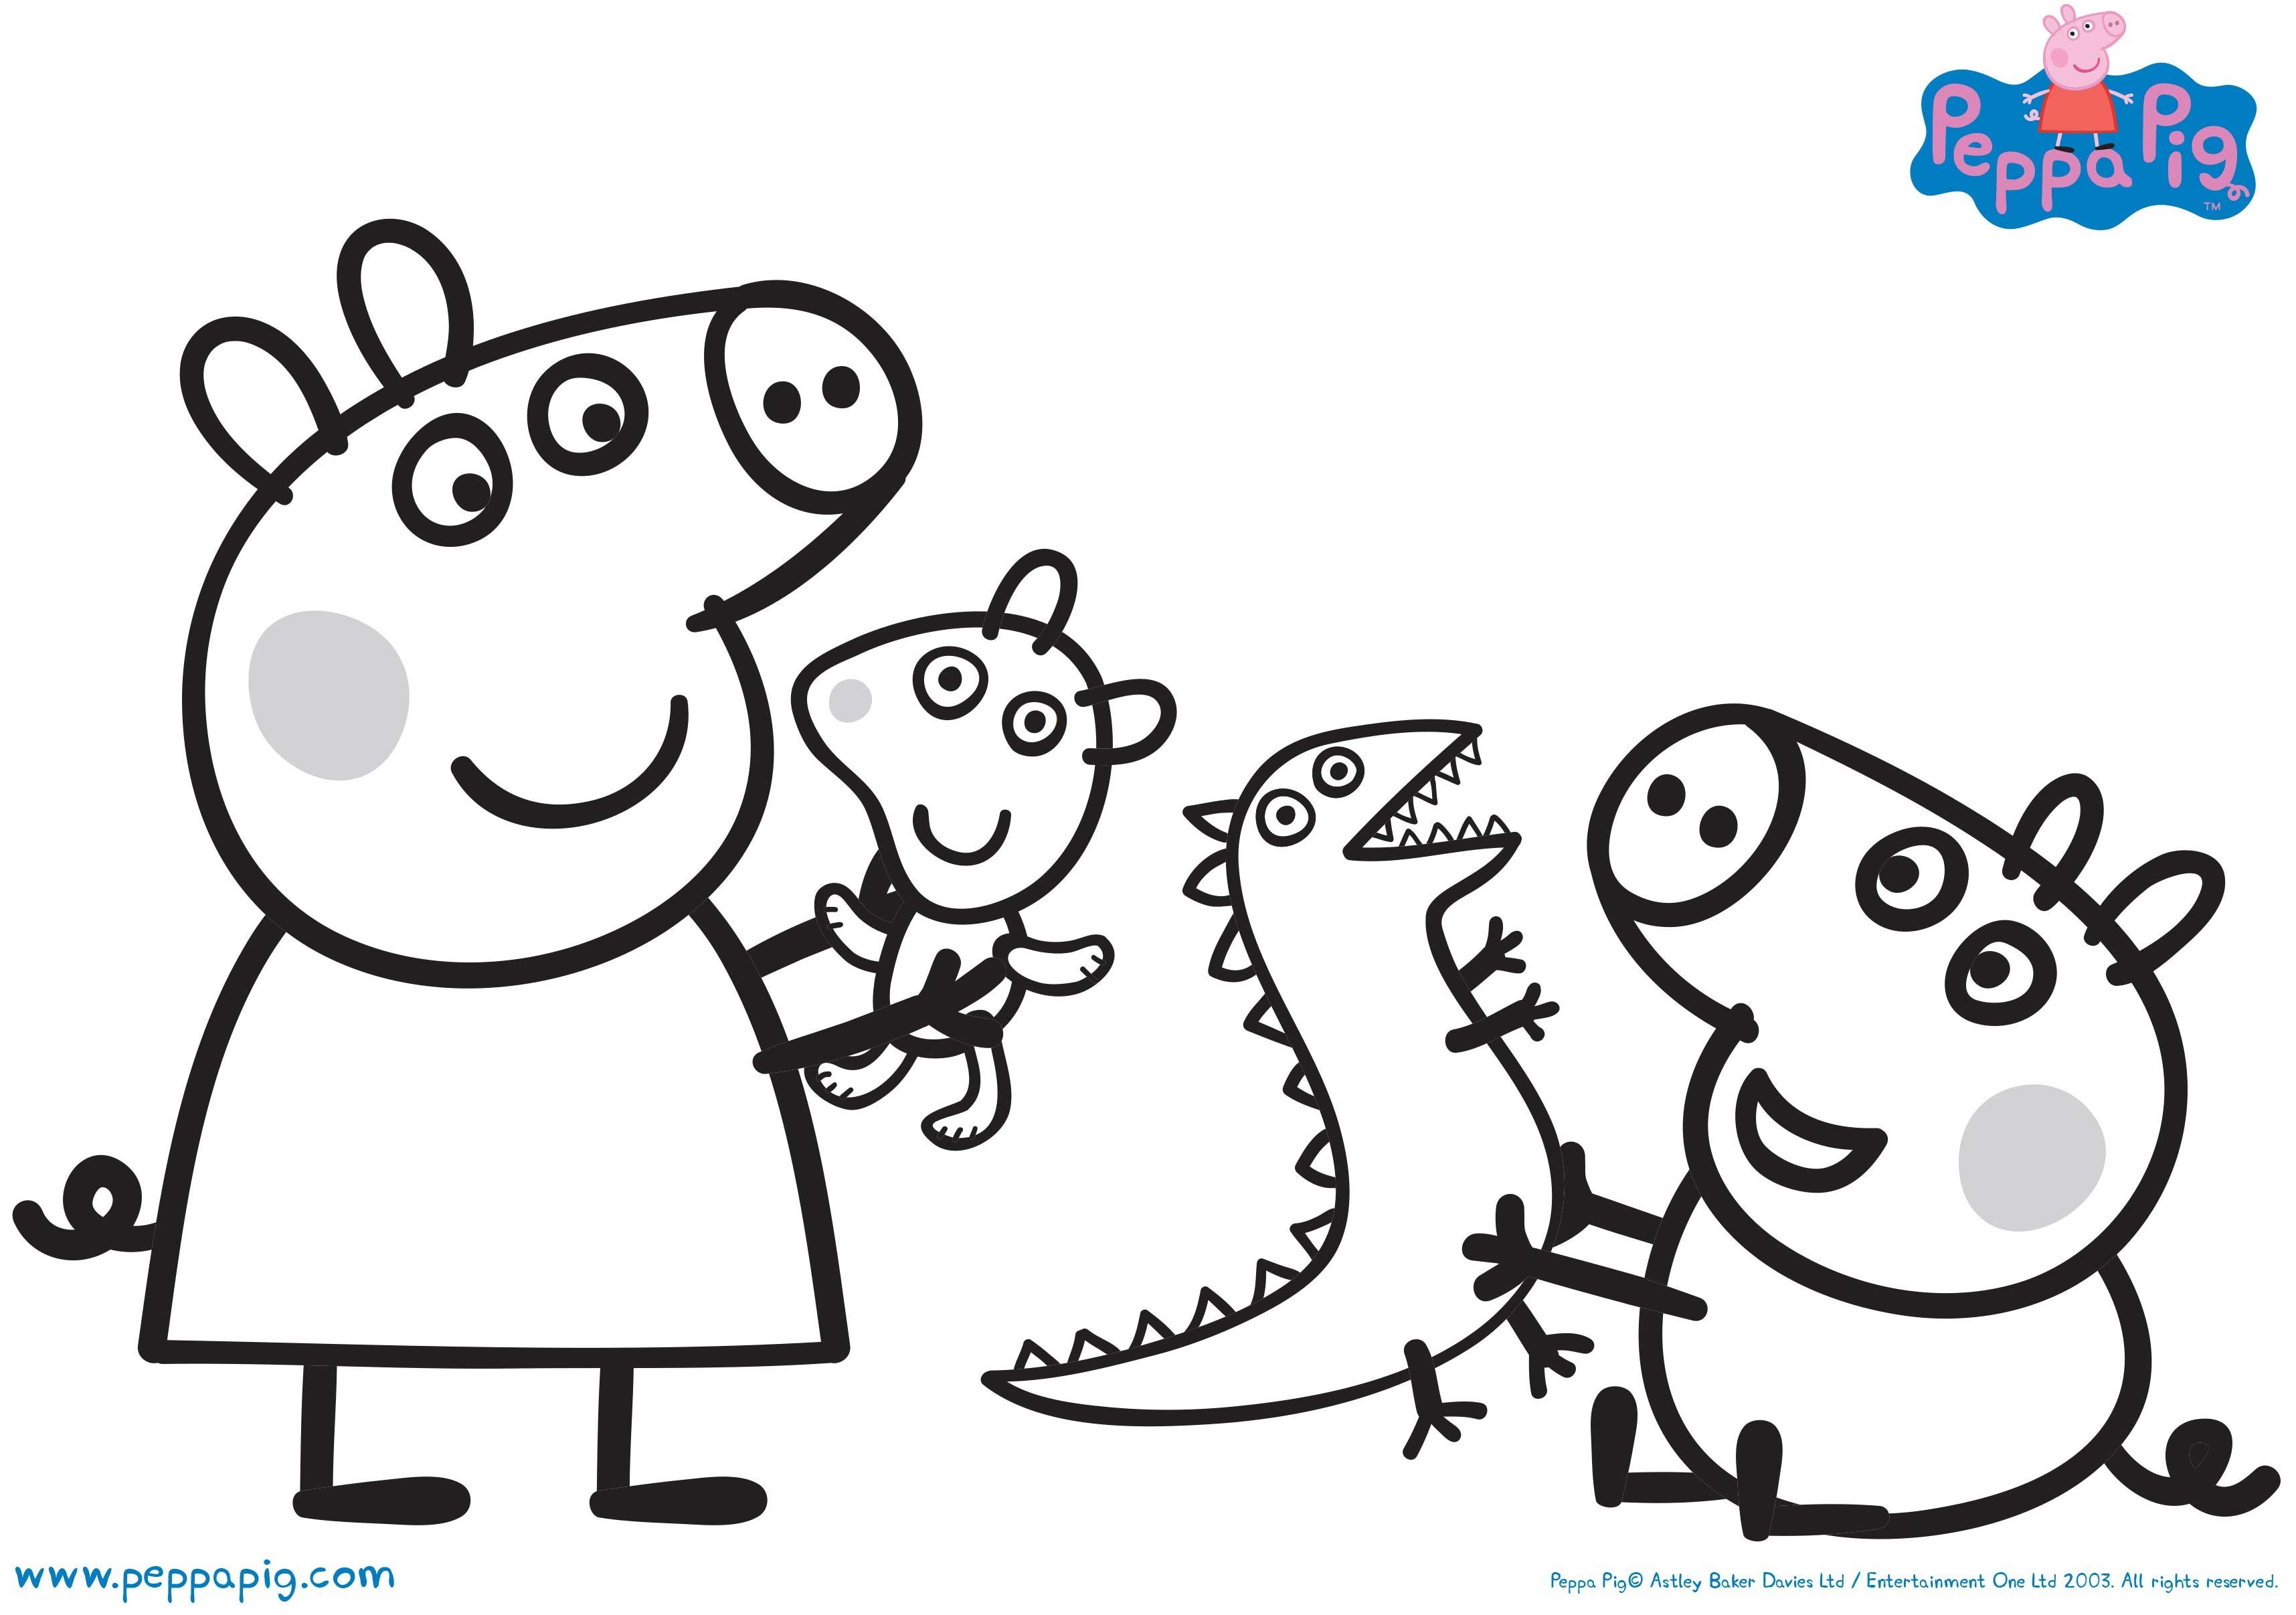 Peppa Pig Colouring Pages Uk - BubaKids.com